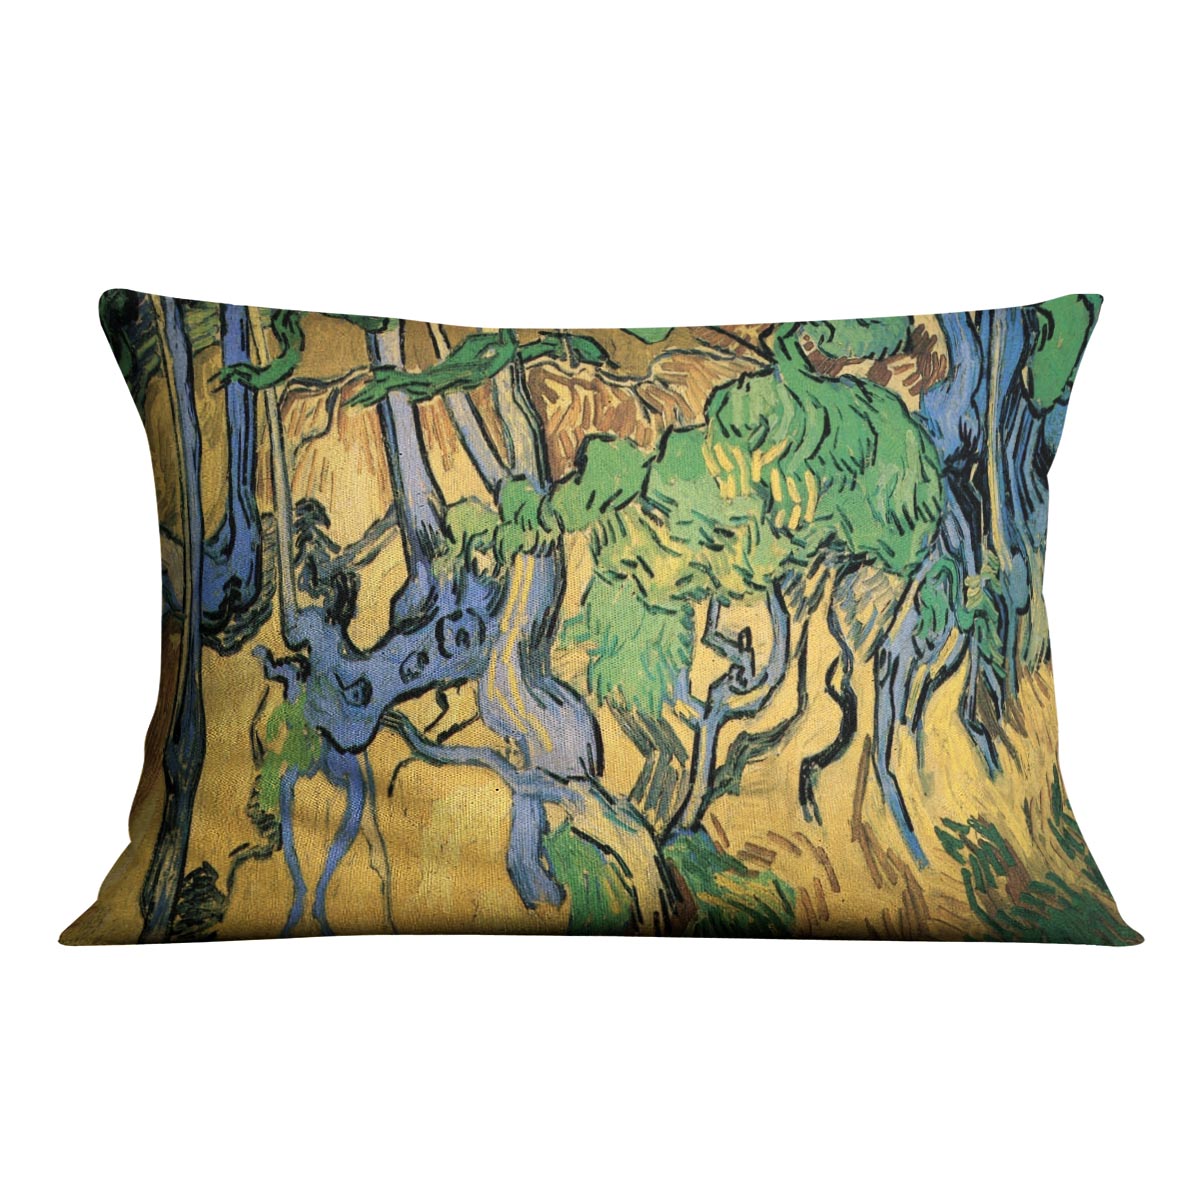 Tree Roots and Trunks by Van Gogh Cushion